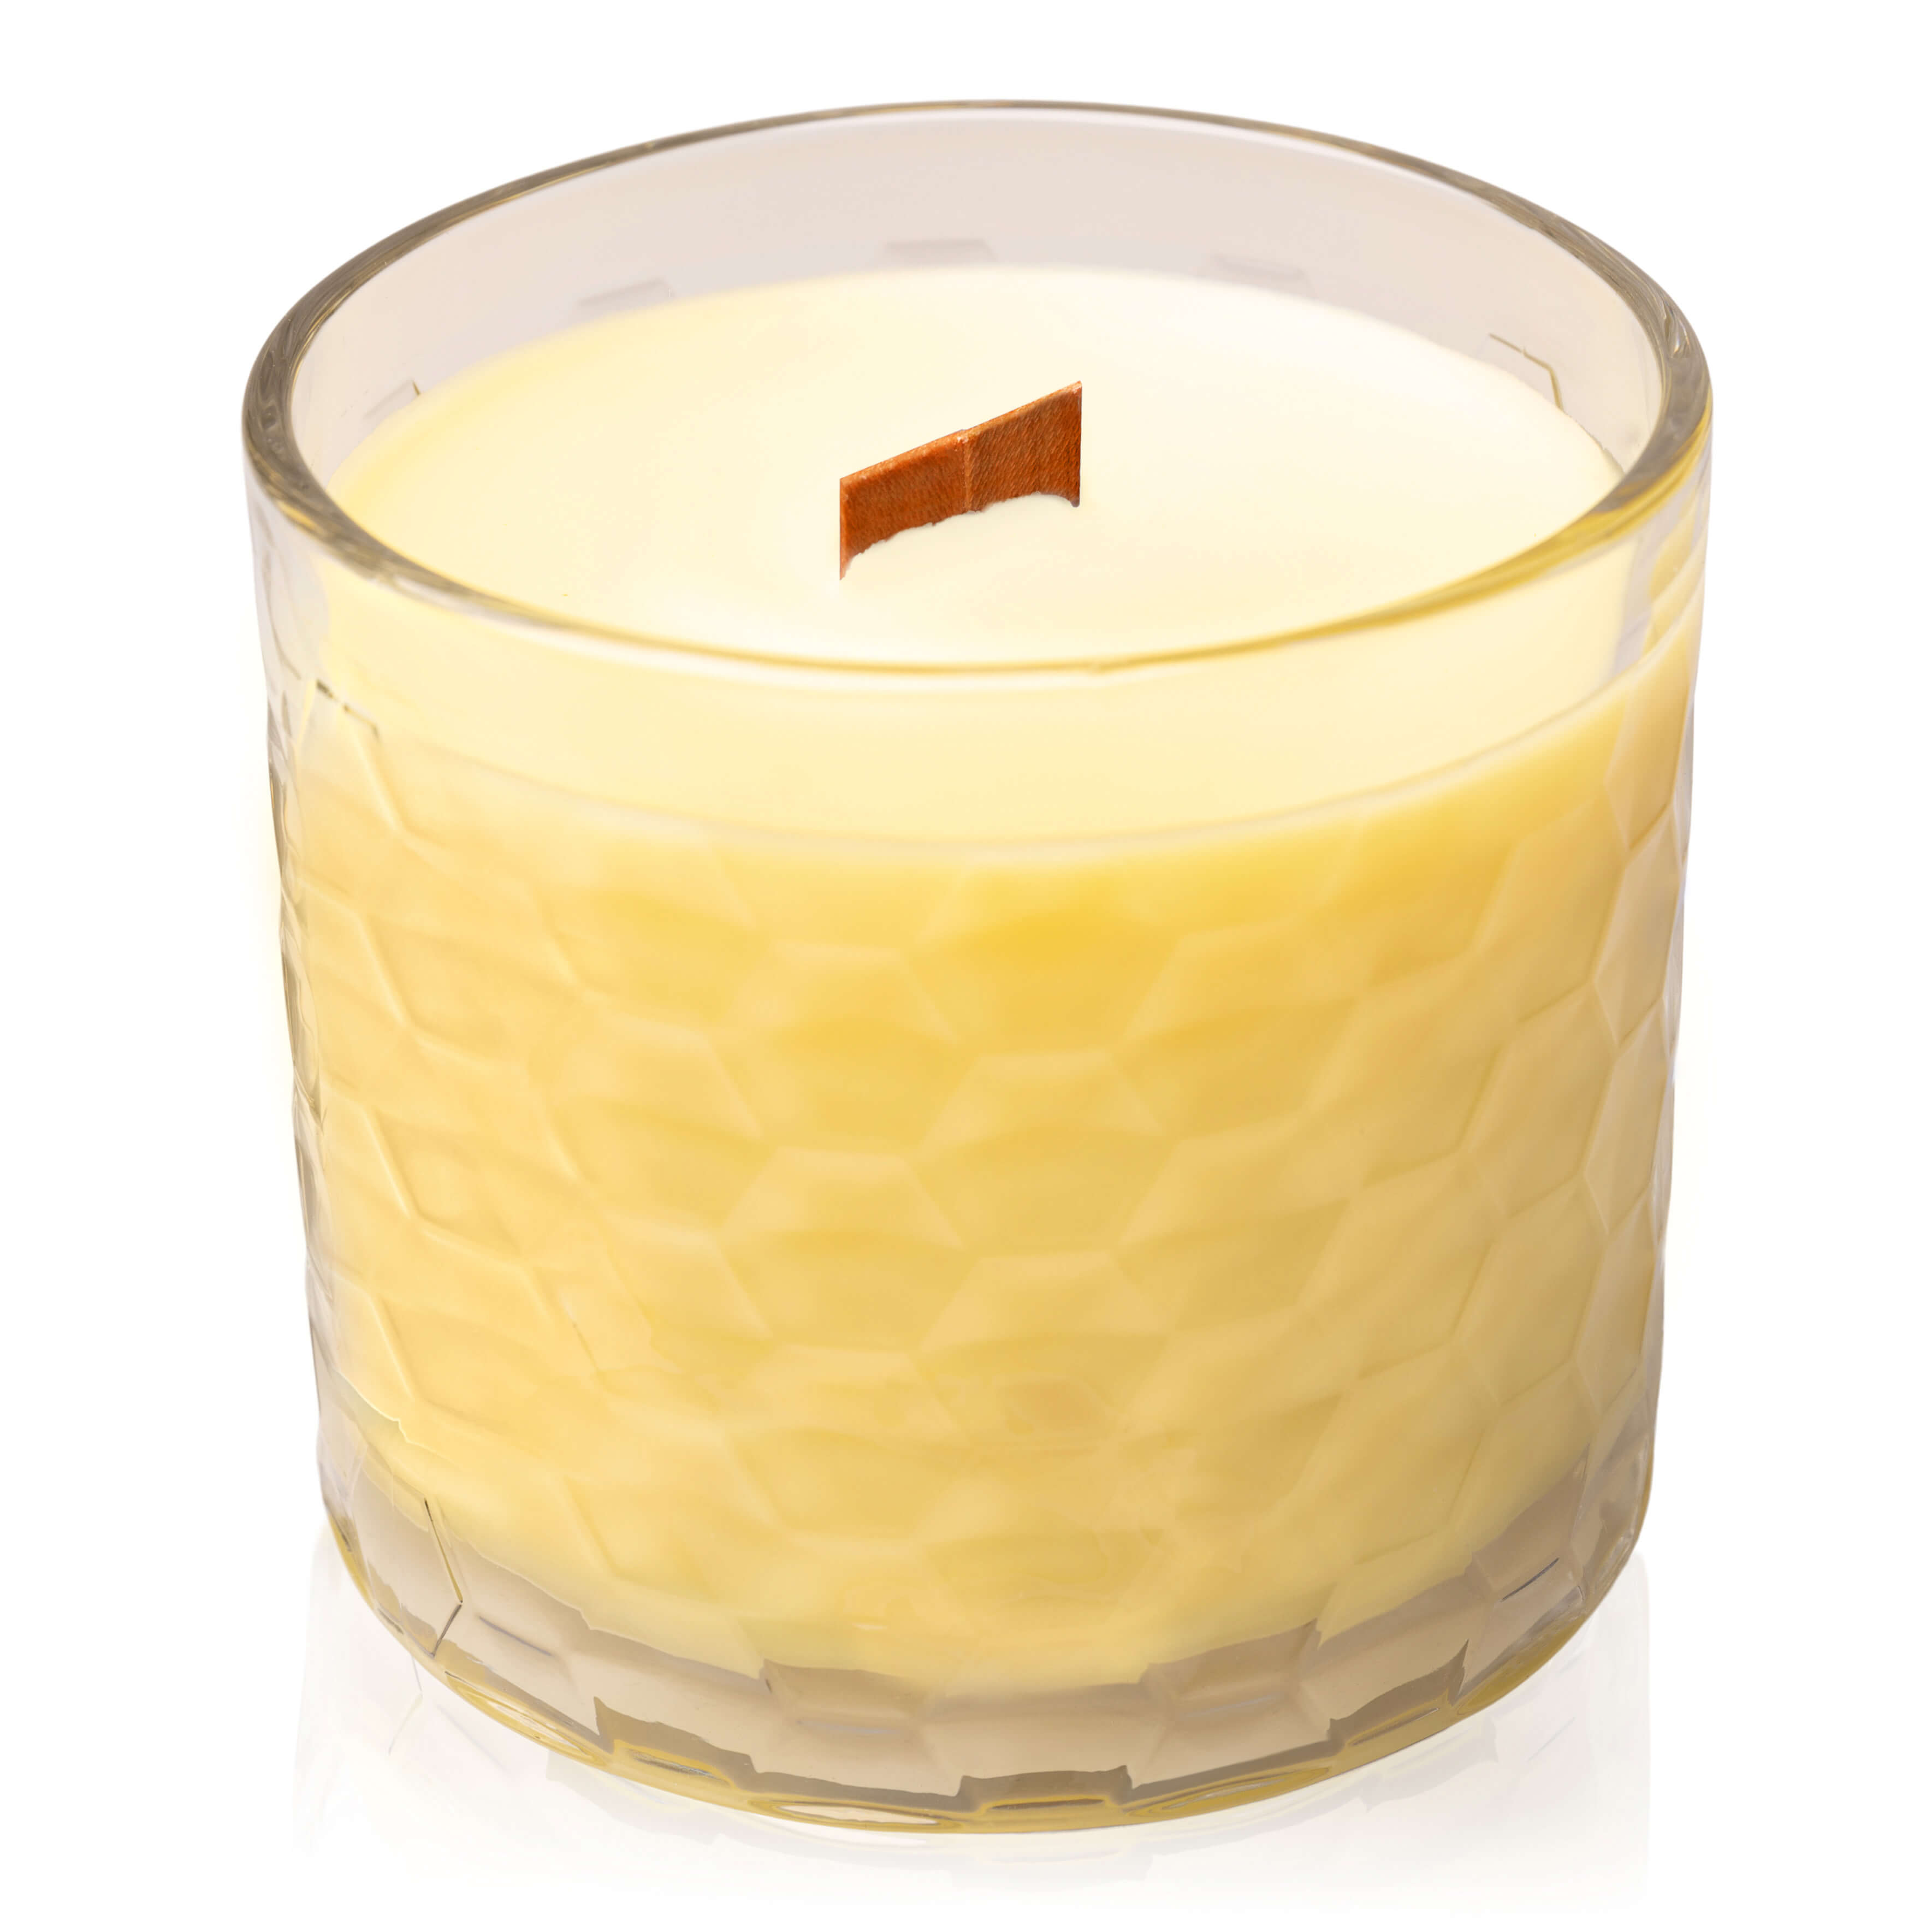 Monkey Farts - Signature Collection Candle